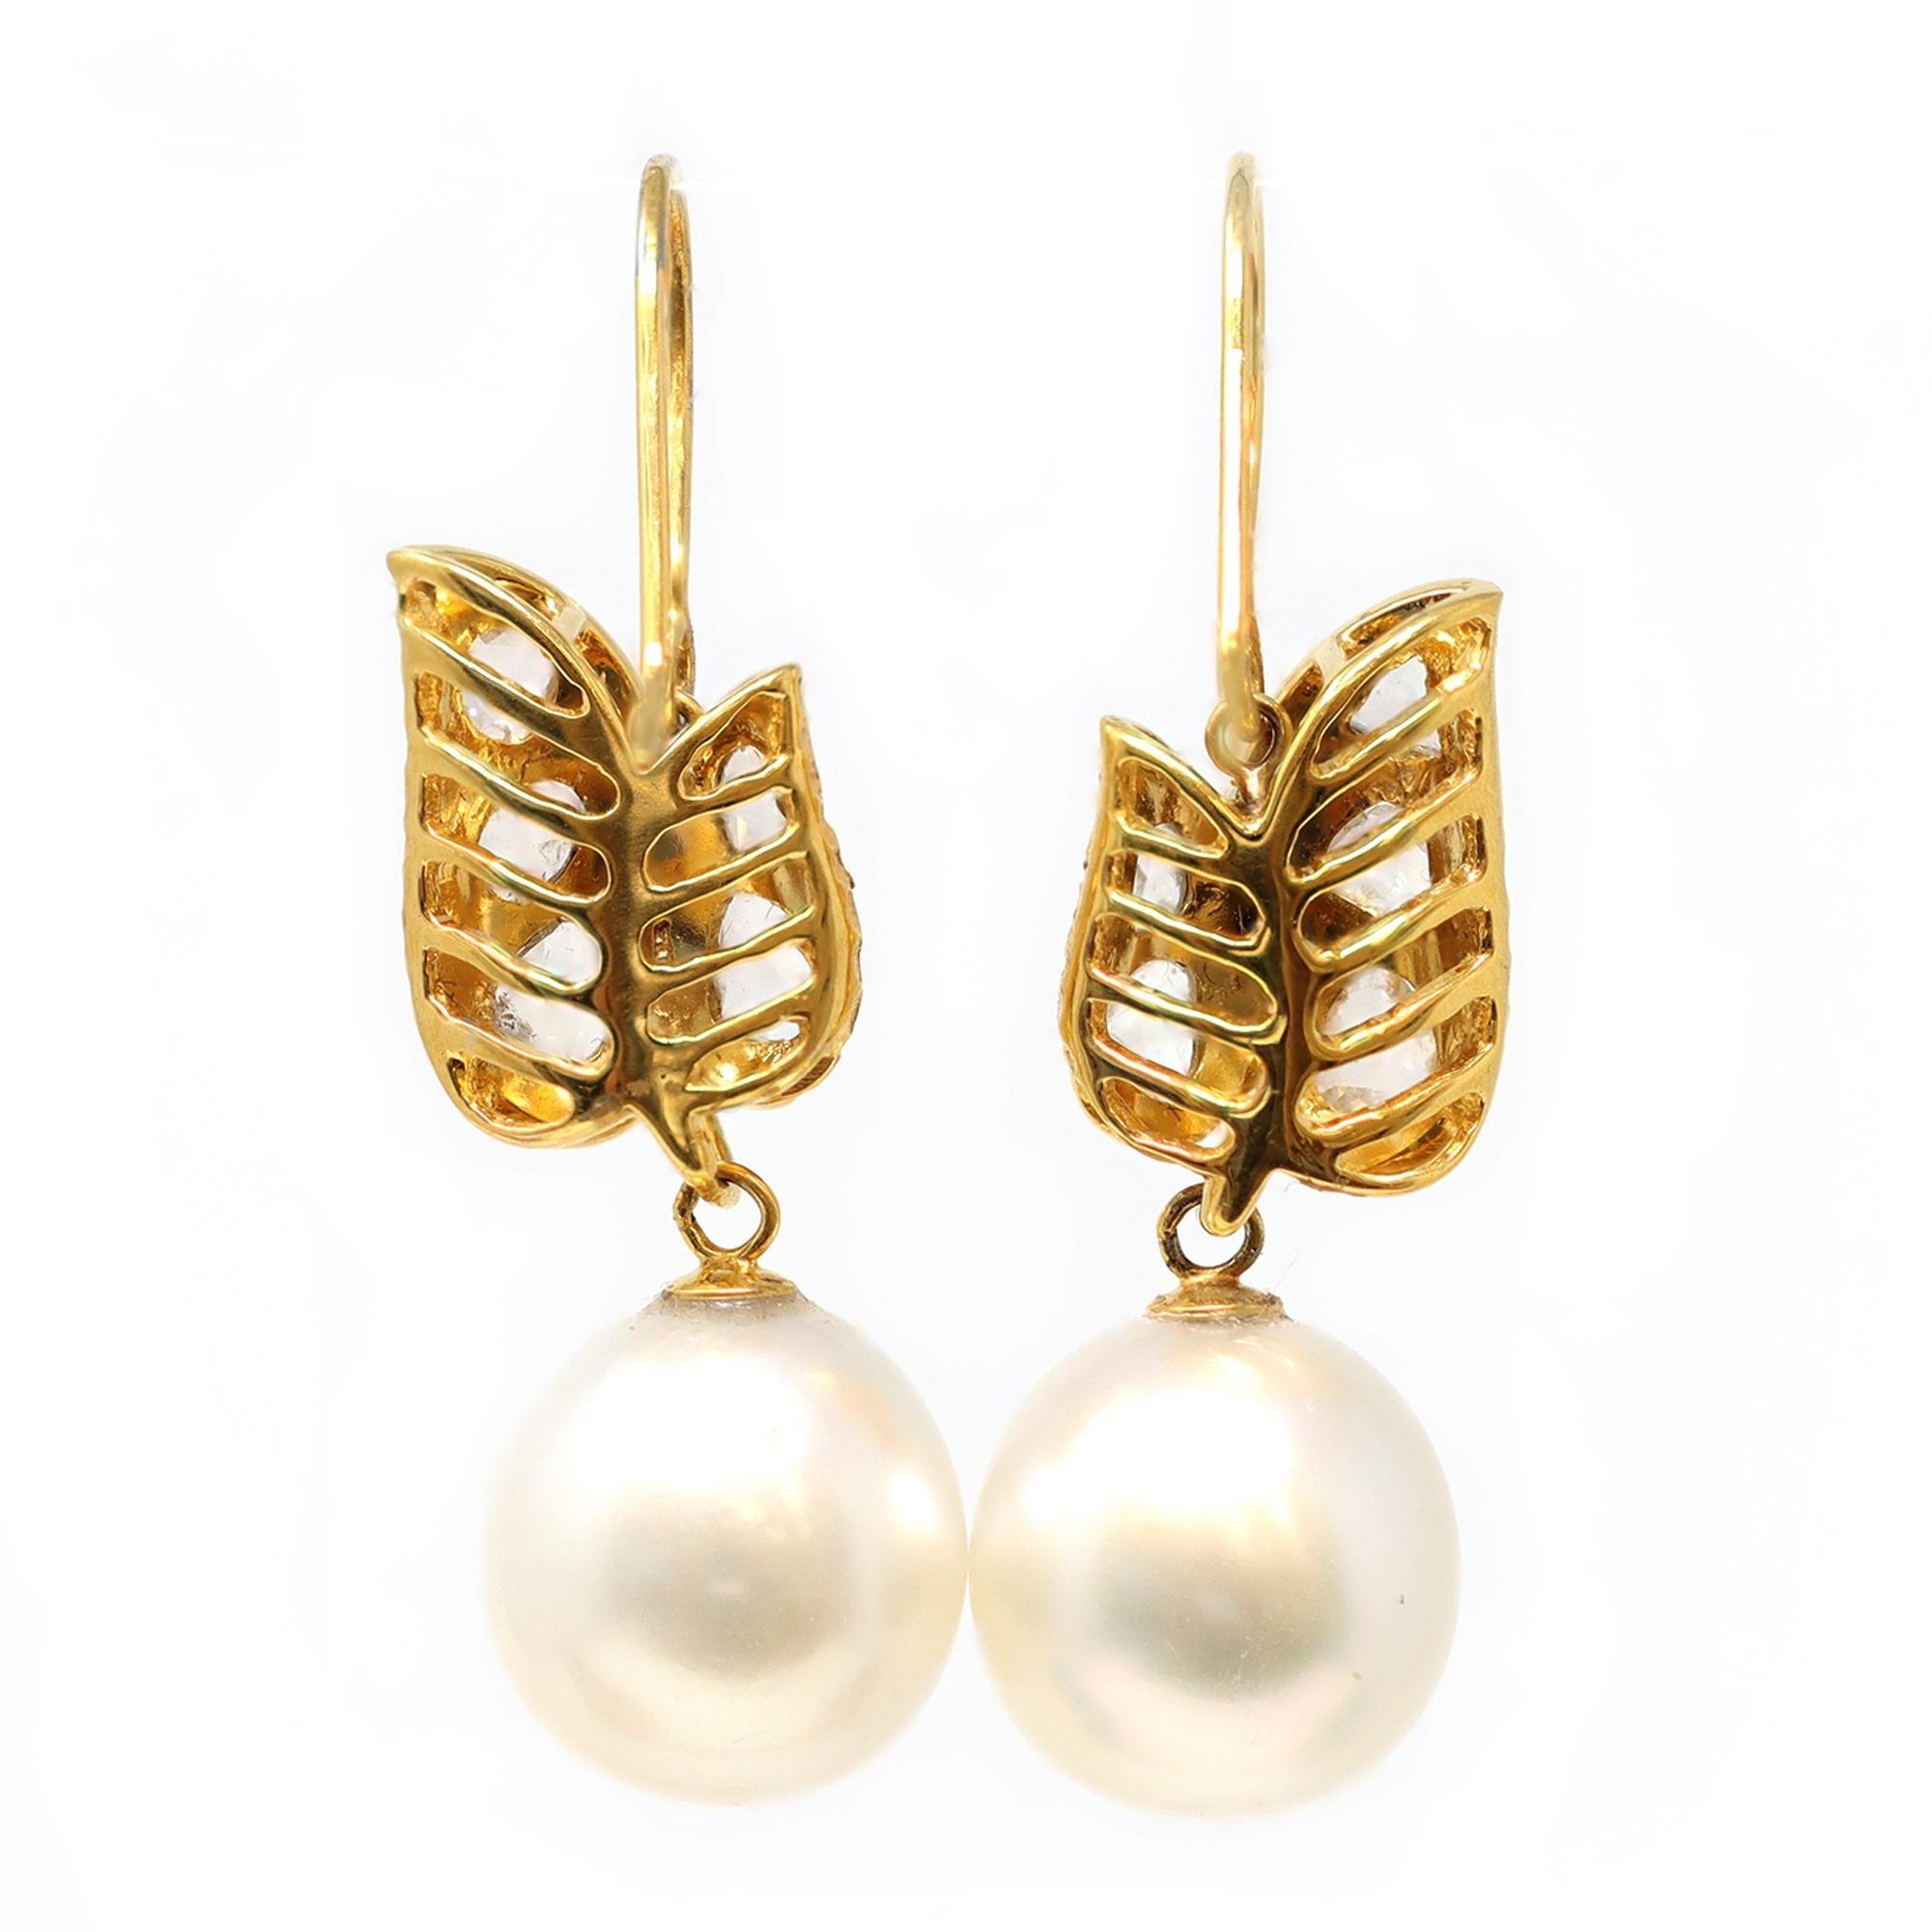 A pair of South Sea pearl and diamond dangling hook earrings in 18-karat yellow gold, circa 1990. The handmade earrings feature rose-cut diamonds with an estimated weight of 2 carats and IJ color, VS-SI clarity. The dangling white pearls measure 12